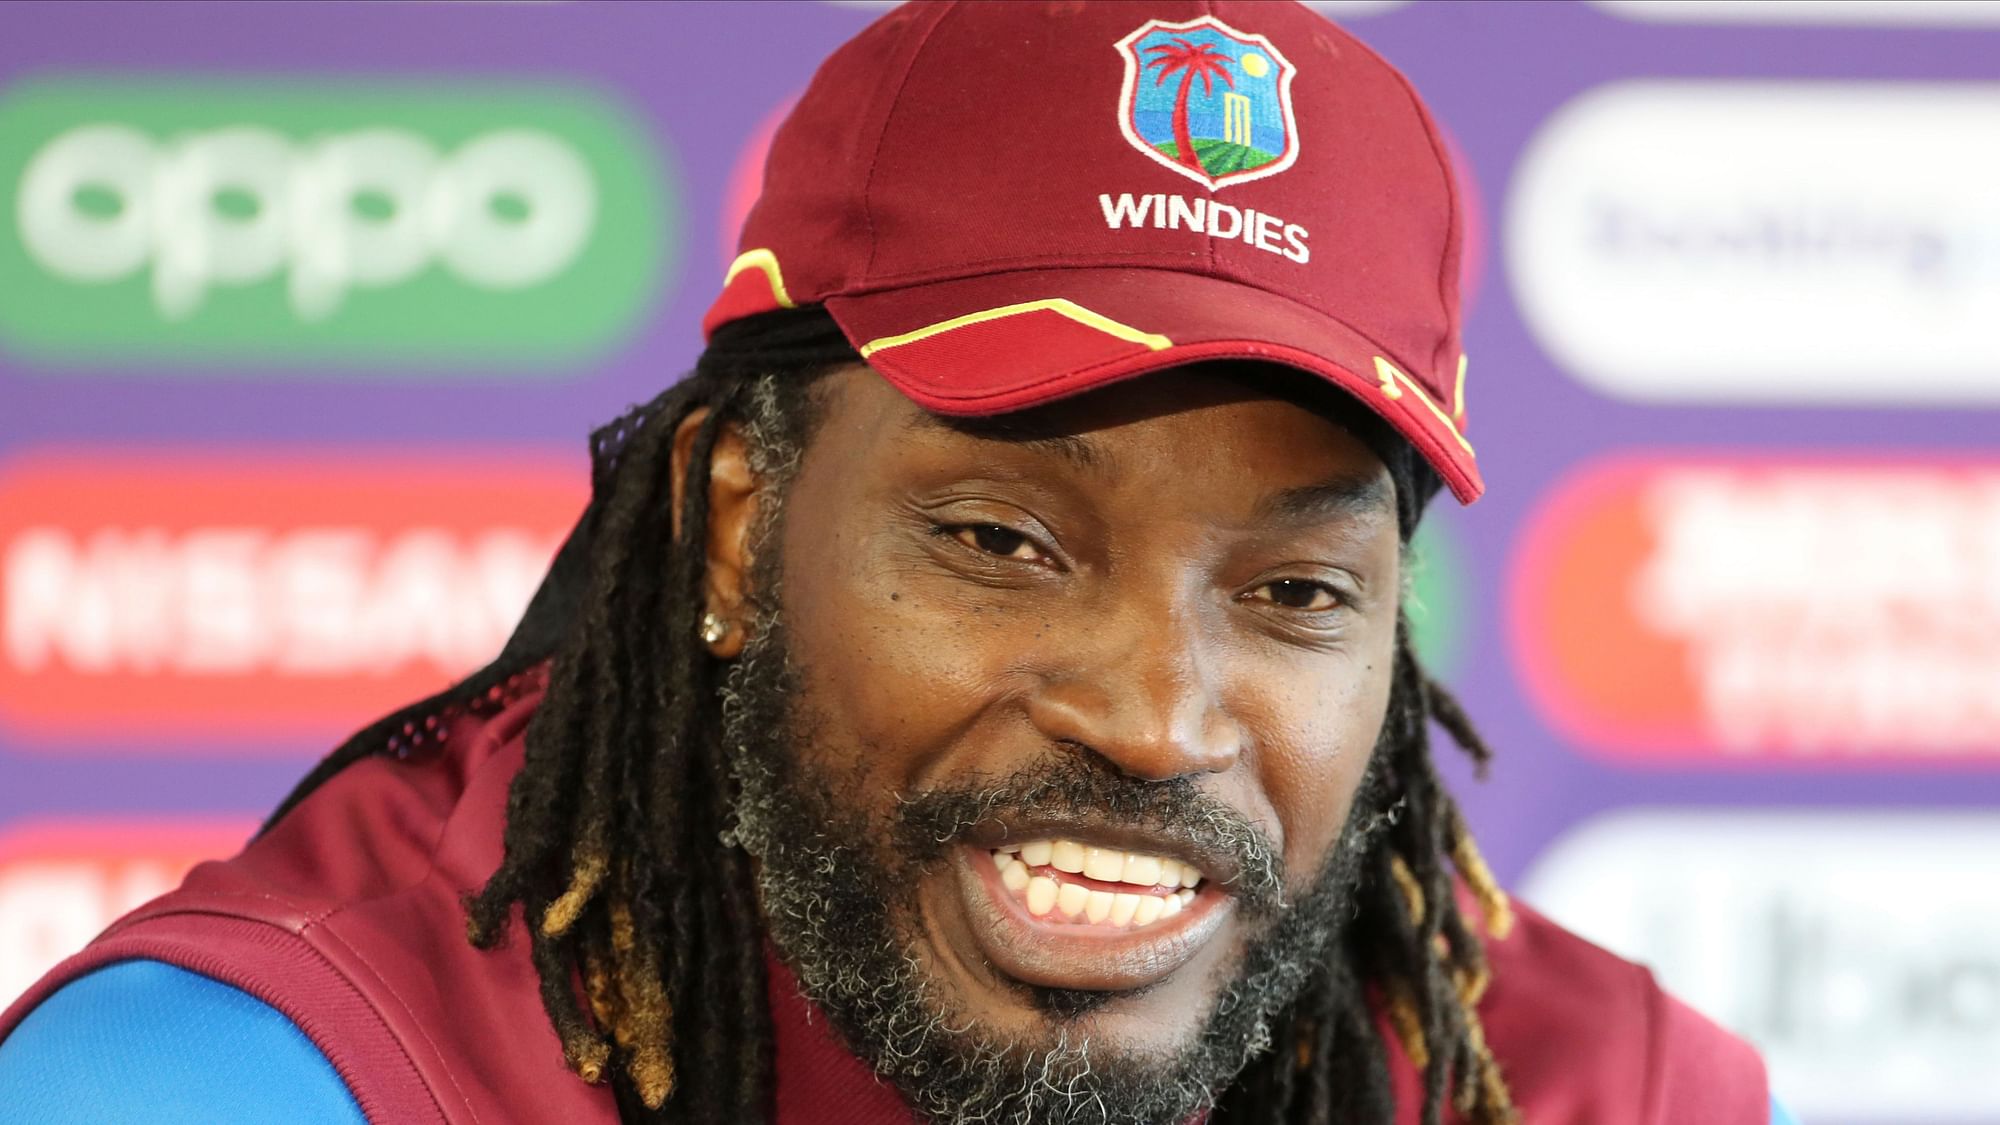 Gayle will retire from international cricket after the home series against India.